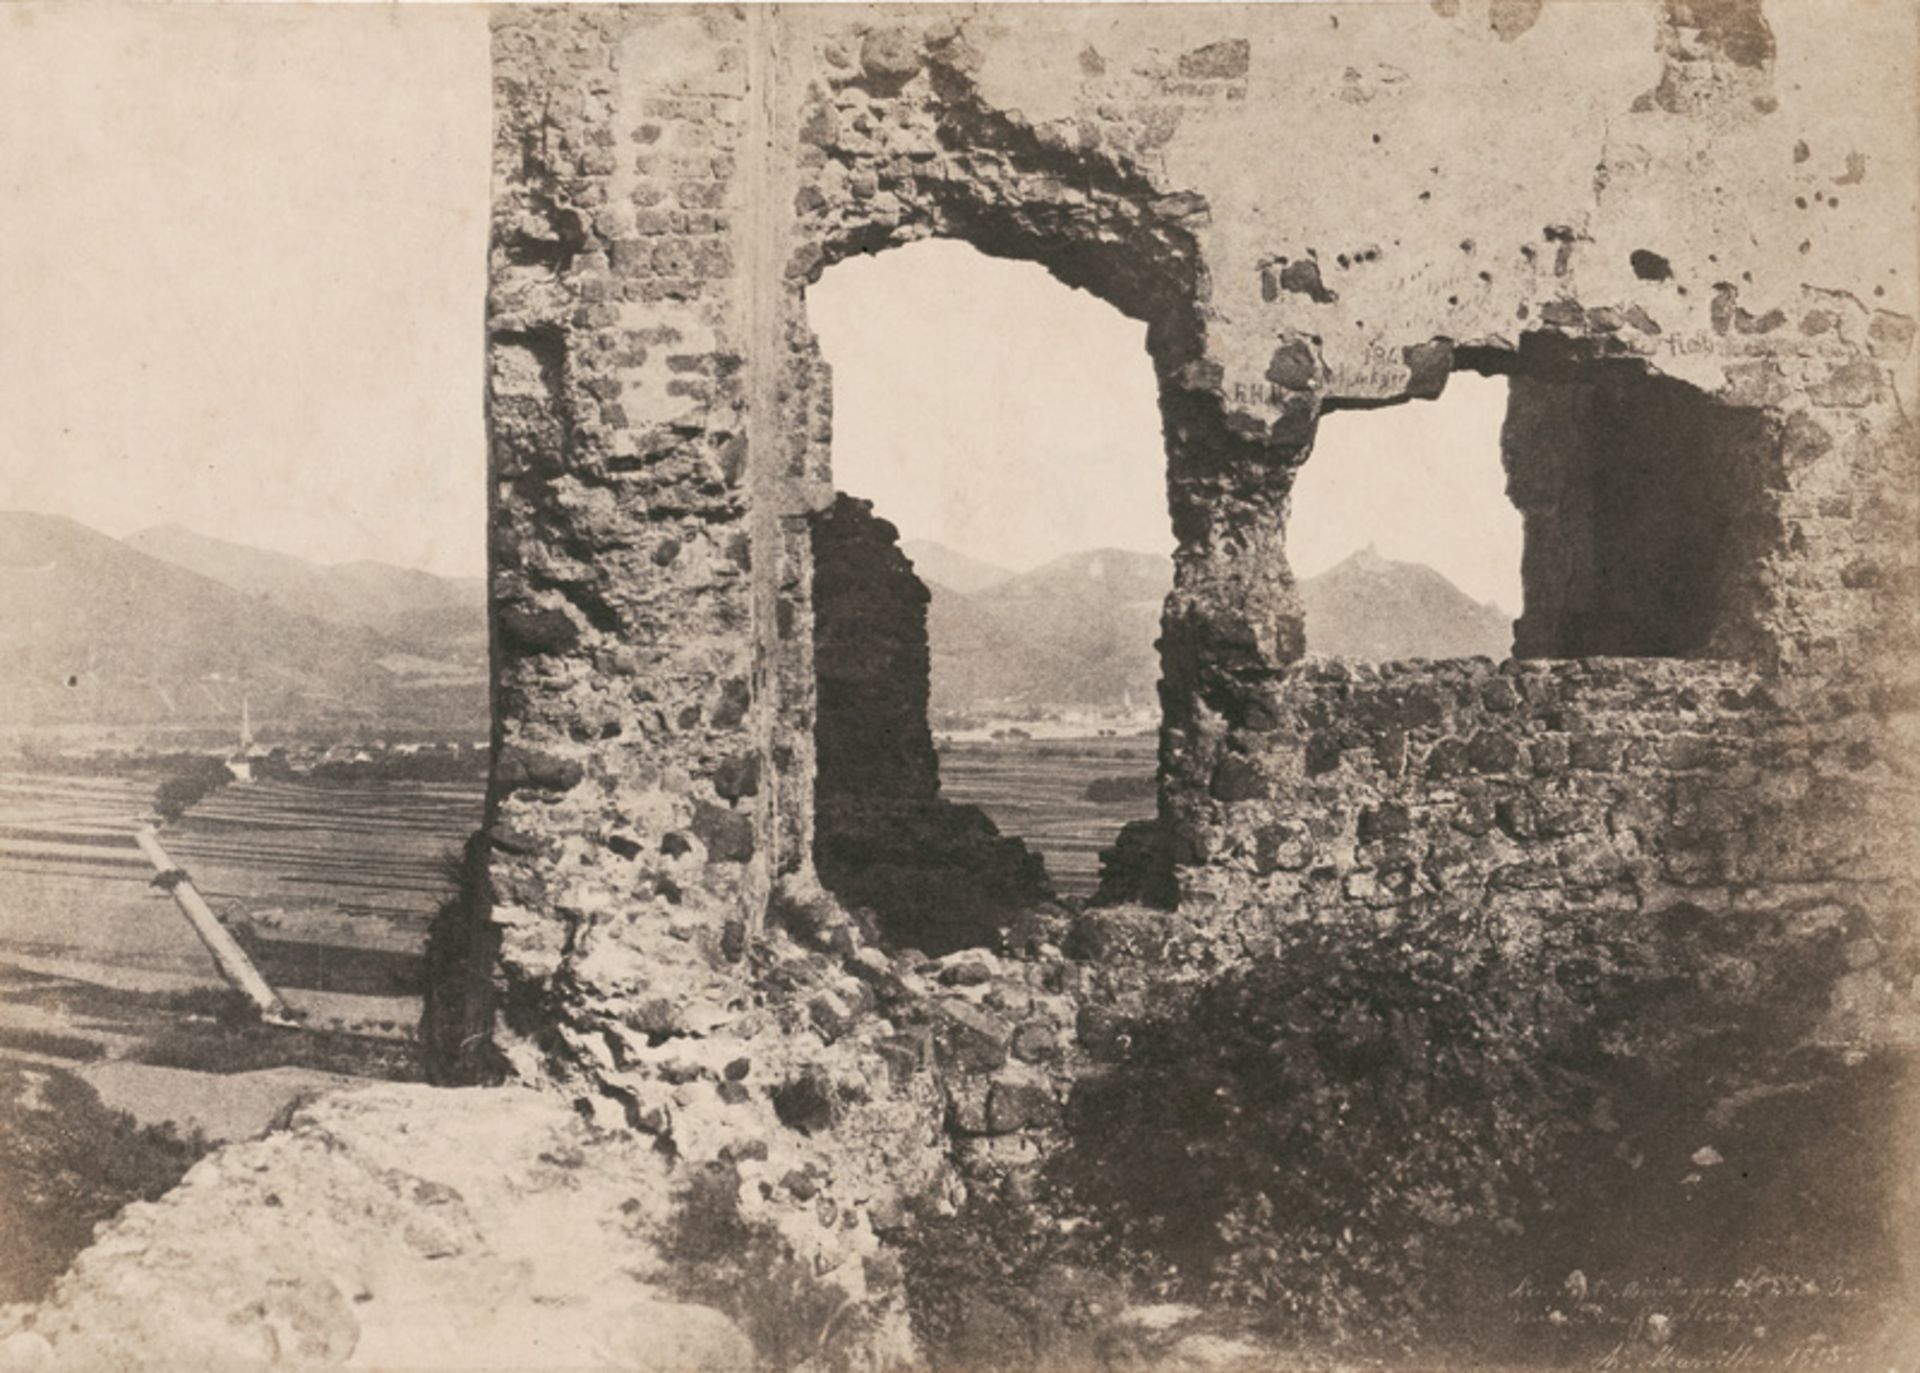 Marville, Charles: The Seven Mountains seen from the Ruins of Godesberg